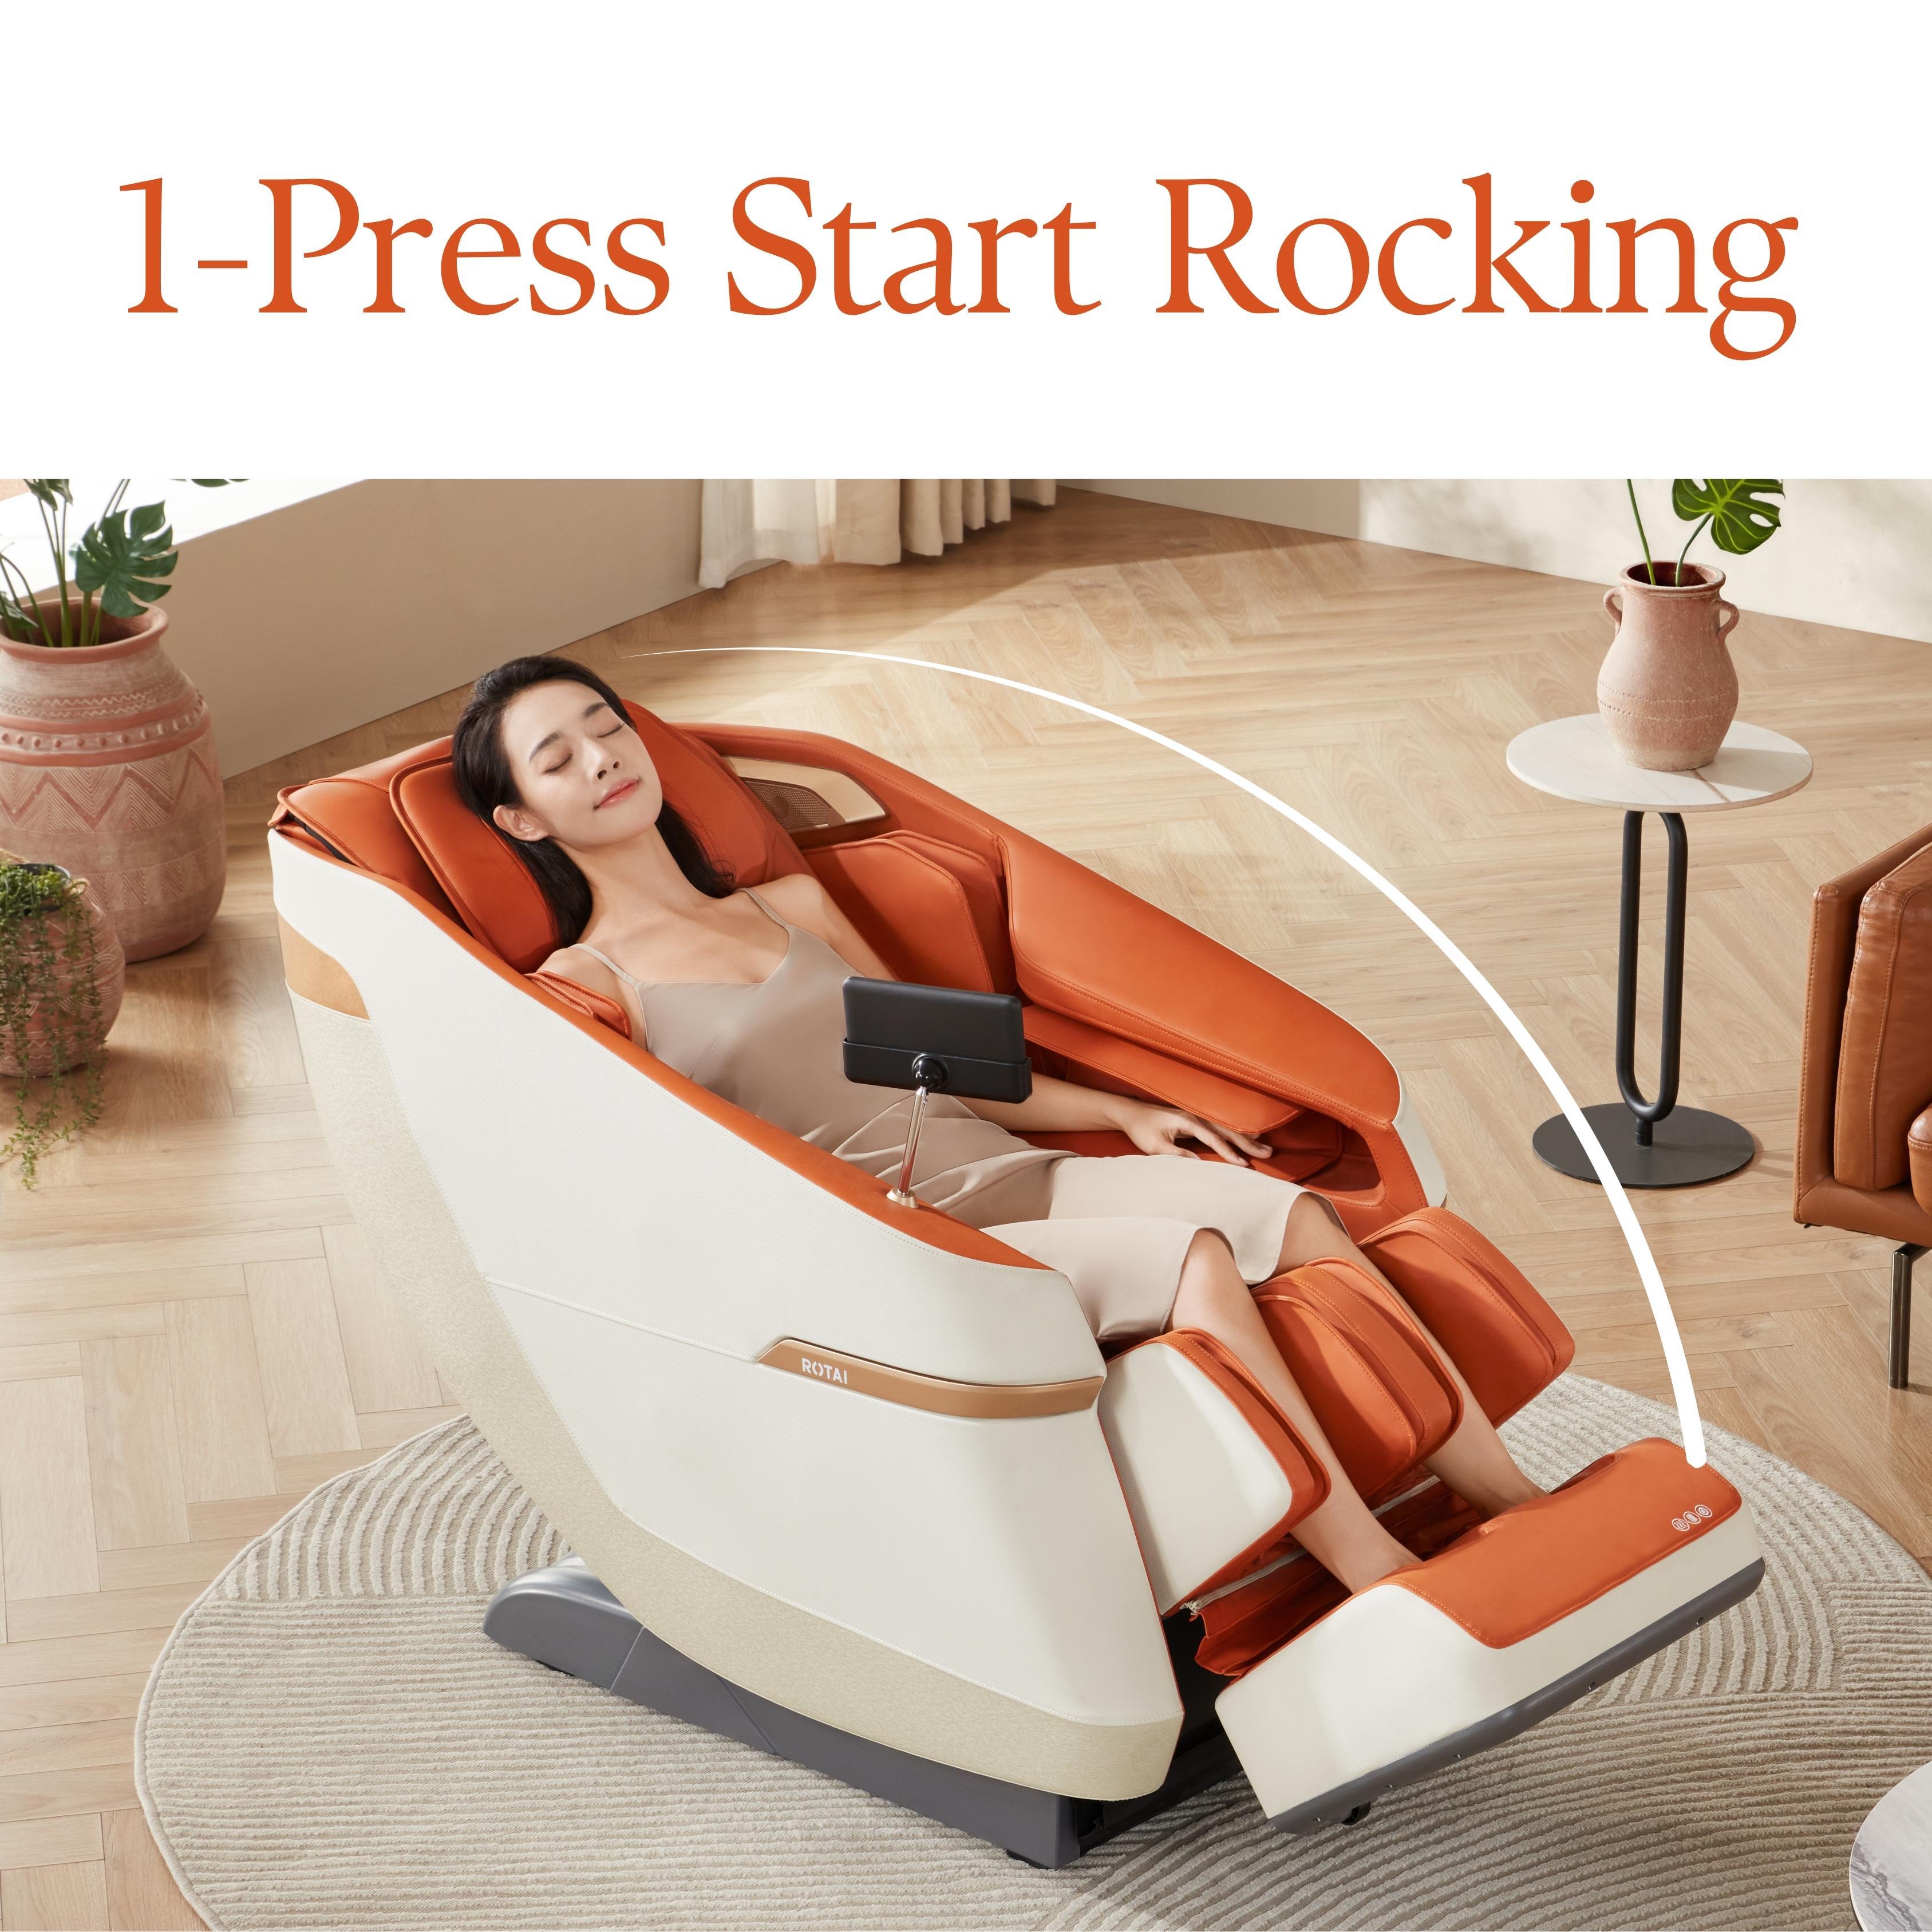 Woman enjoying the Jimny Massage Chair with 1-Press Start Rocking feature in a cozy room noreferrer